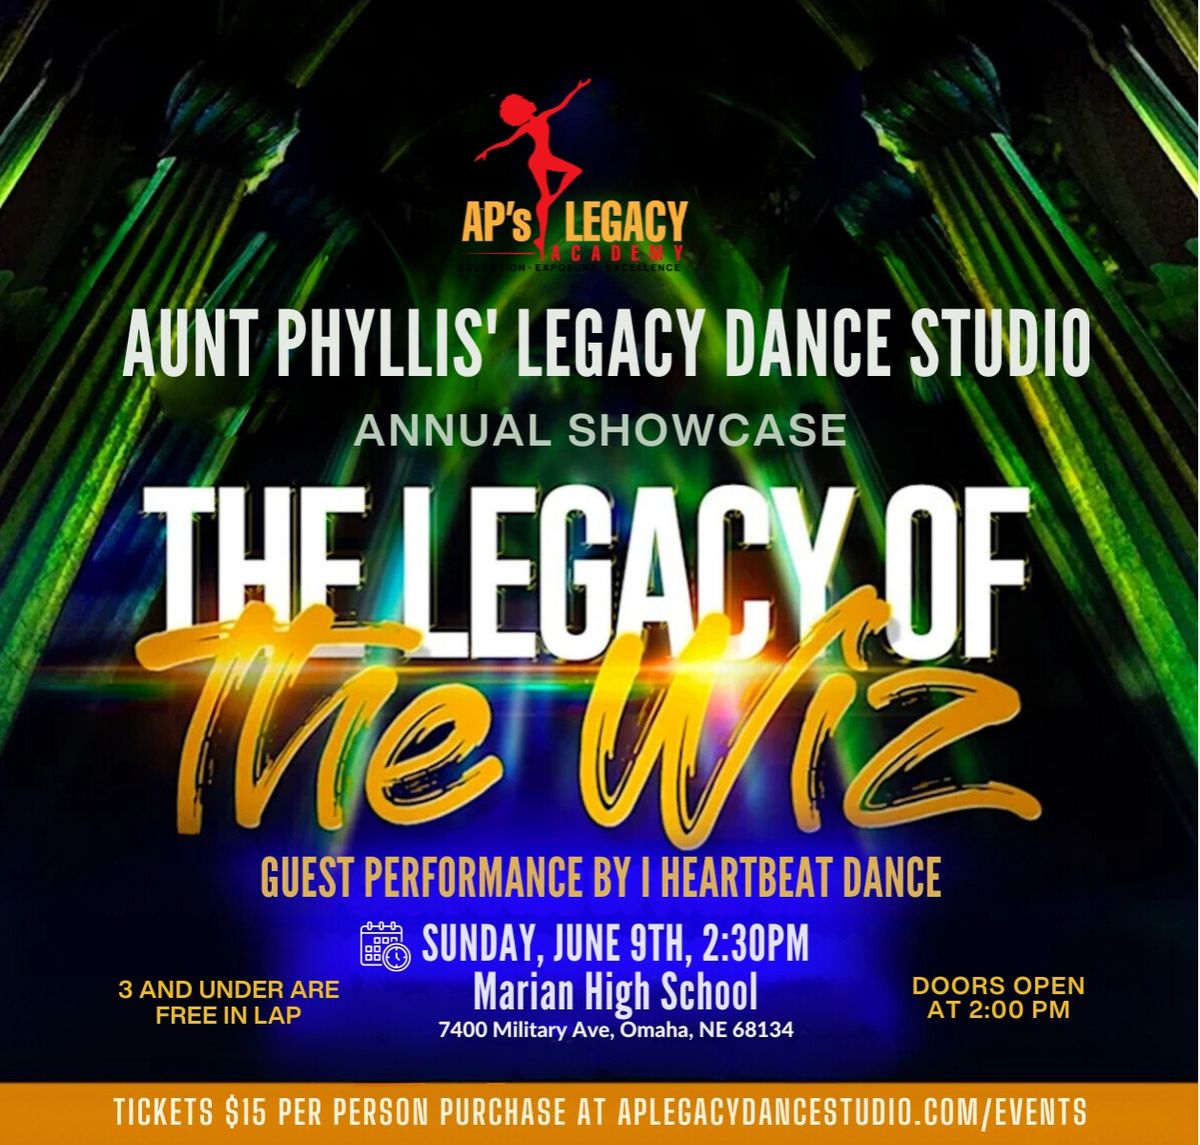 The Legacy of The Wiz